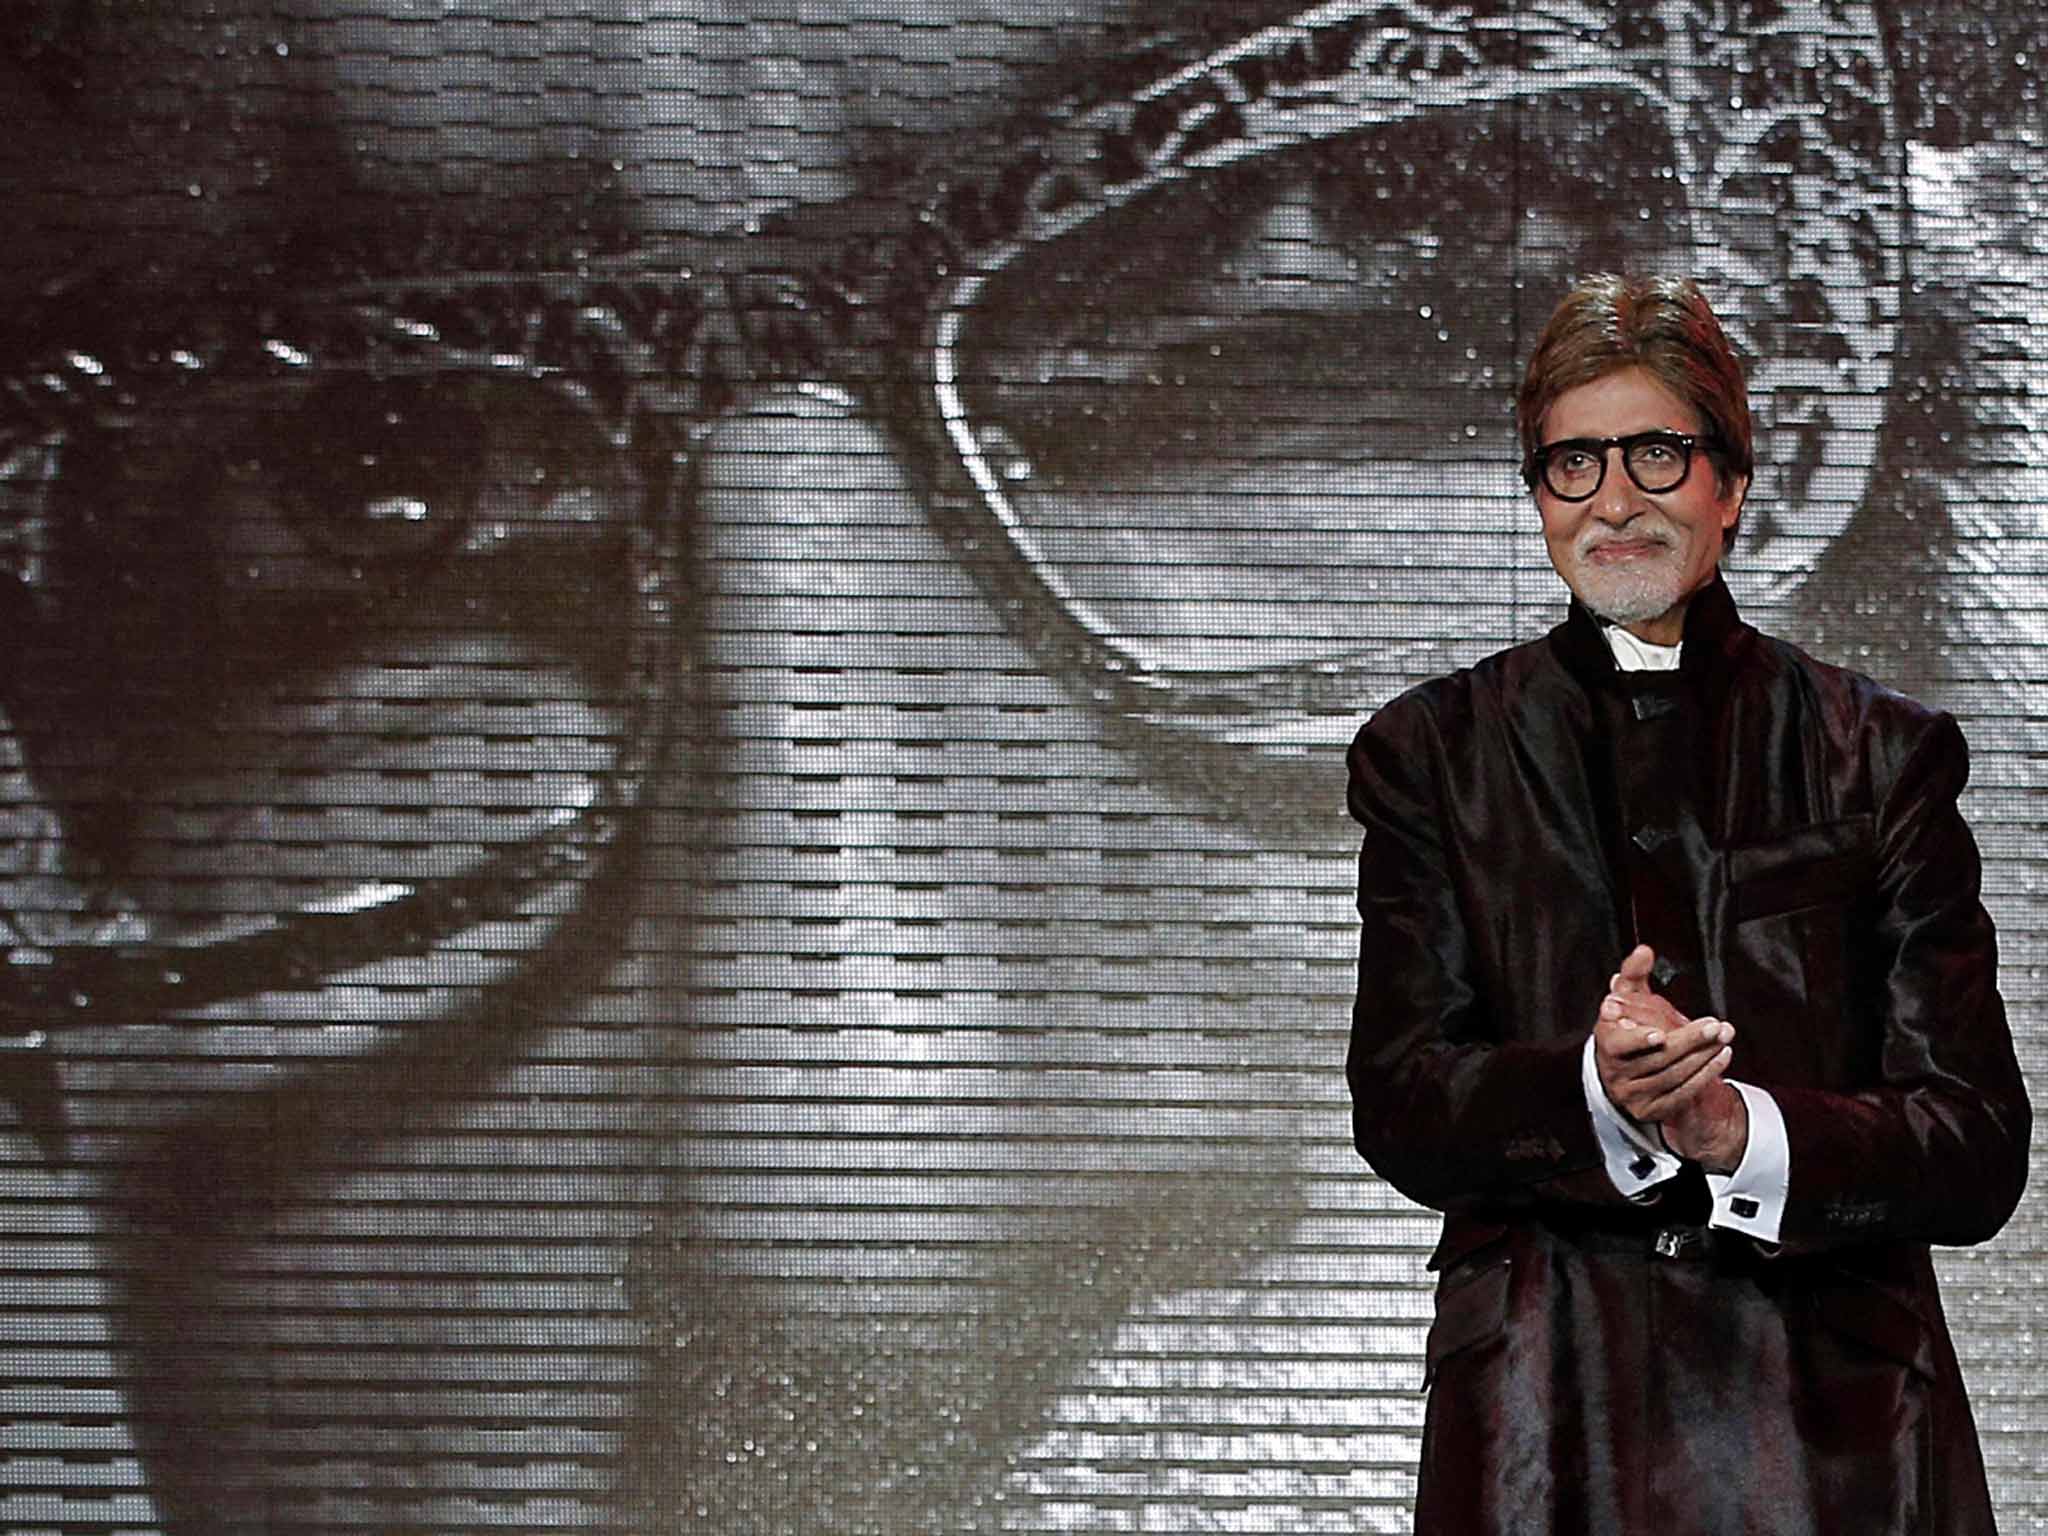 'The Big B': one leading Indian film director has suggested that India's film industry should be called 'Bachchan' instead of Bollywood